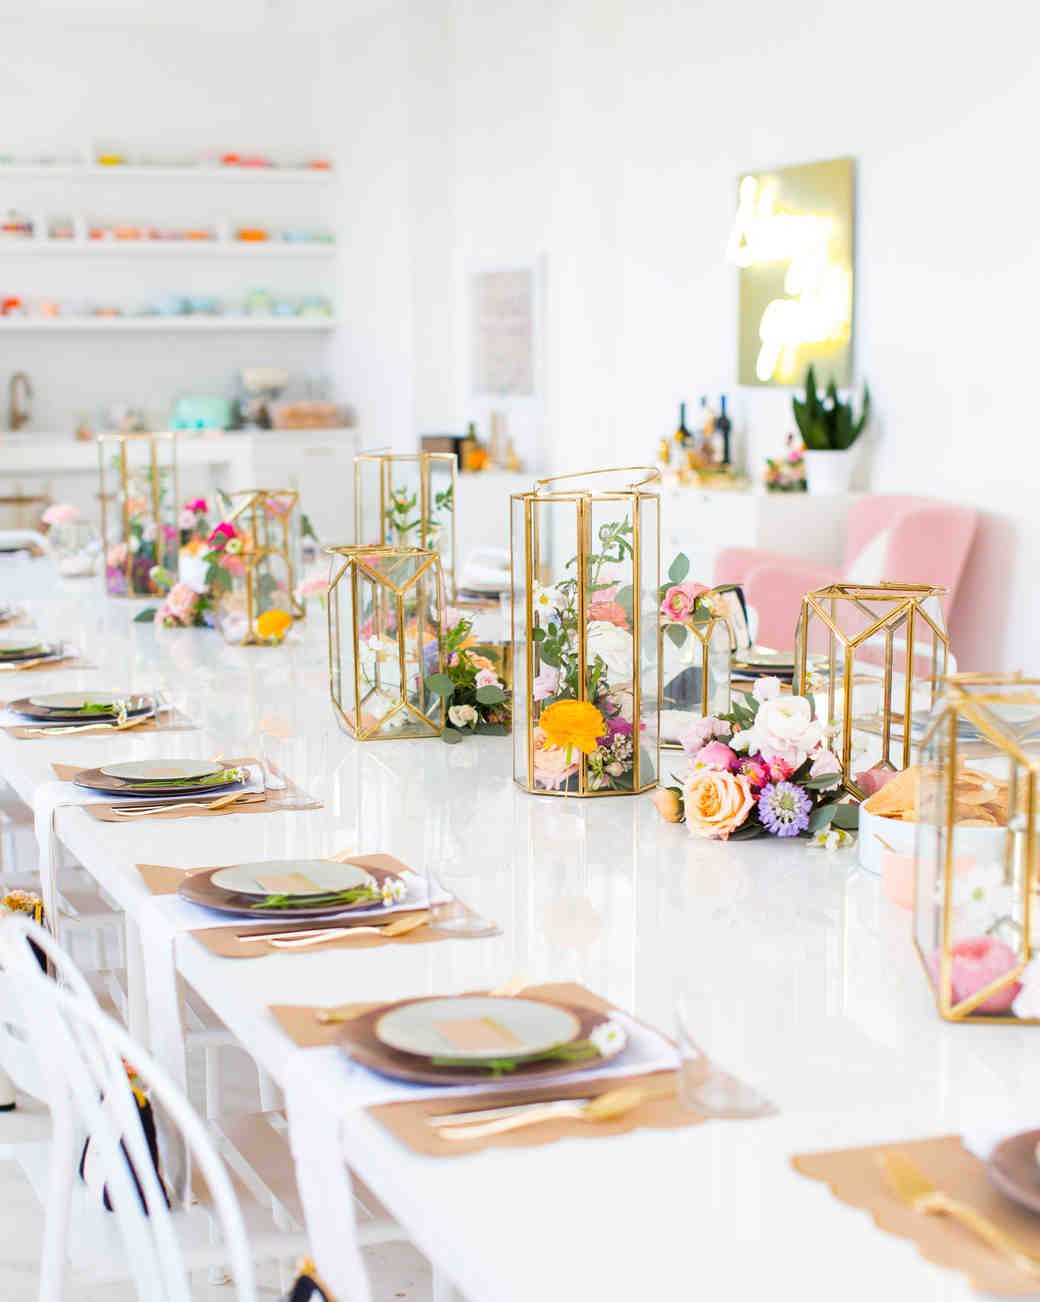 25 Bridal  Shower  Centerpieces  the Bride to Be Will Love 